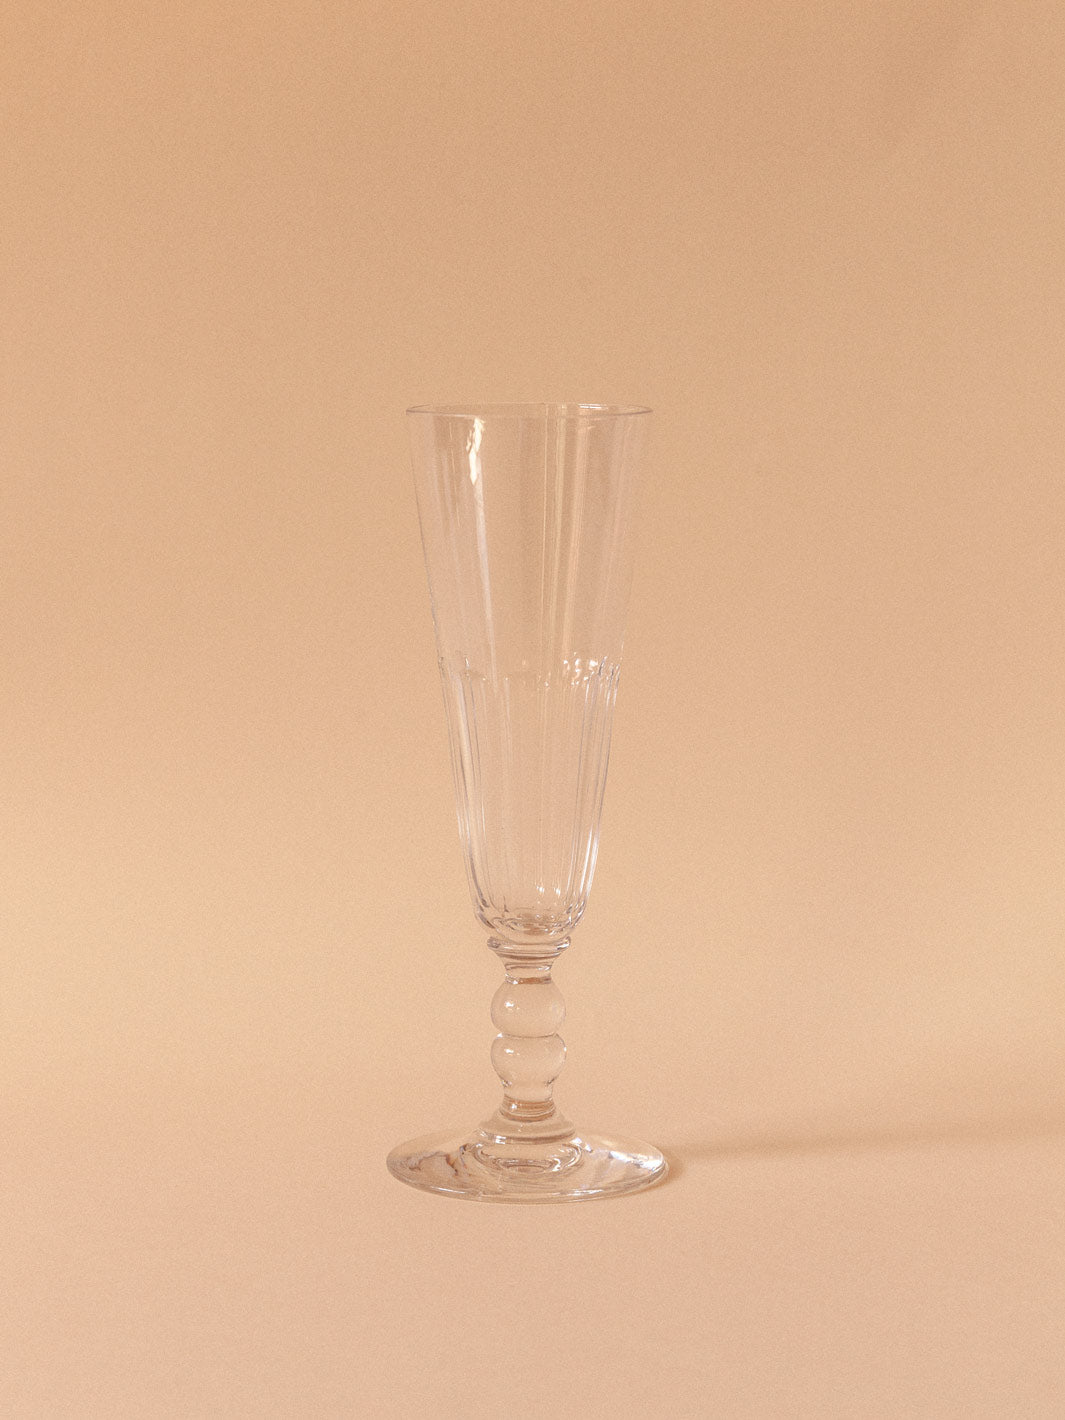 Set of 10 champagne flutes from the 1920s